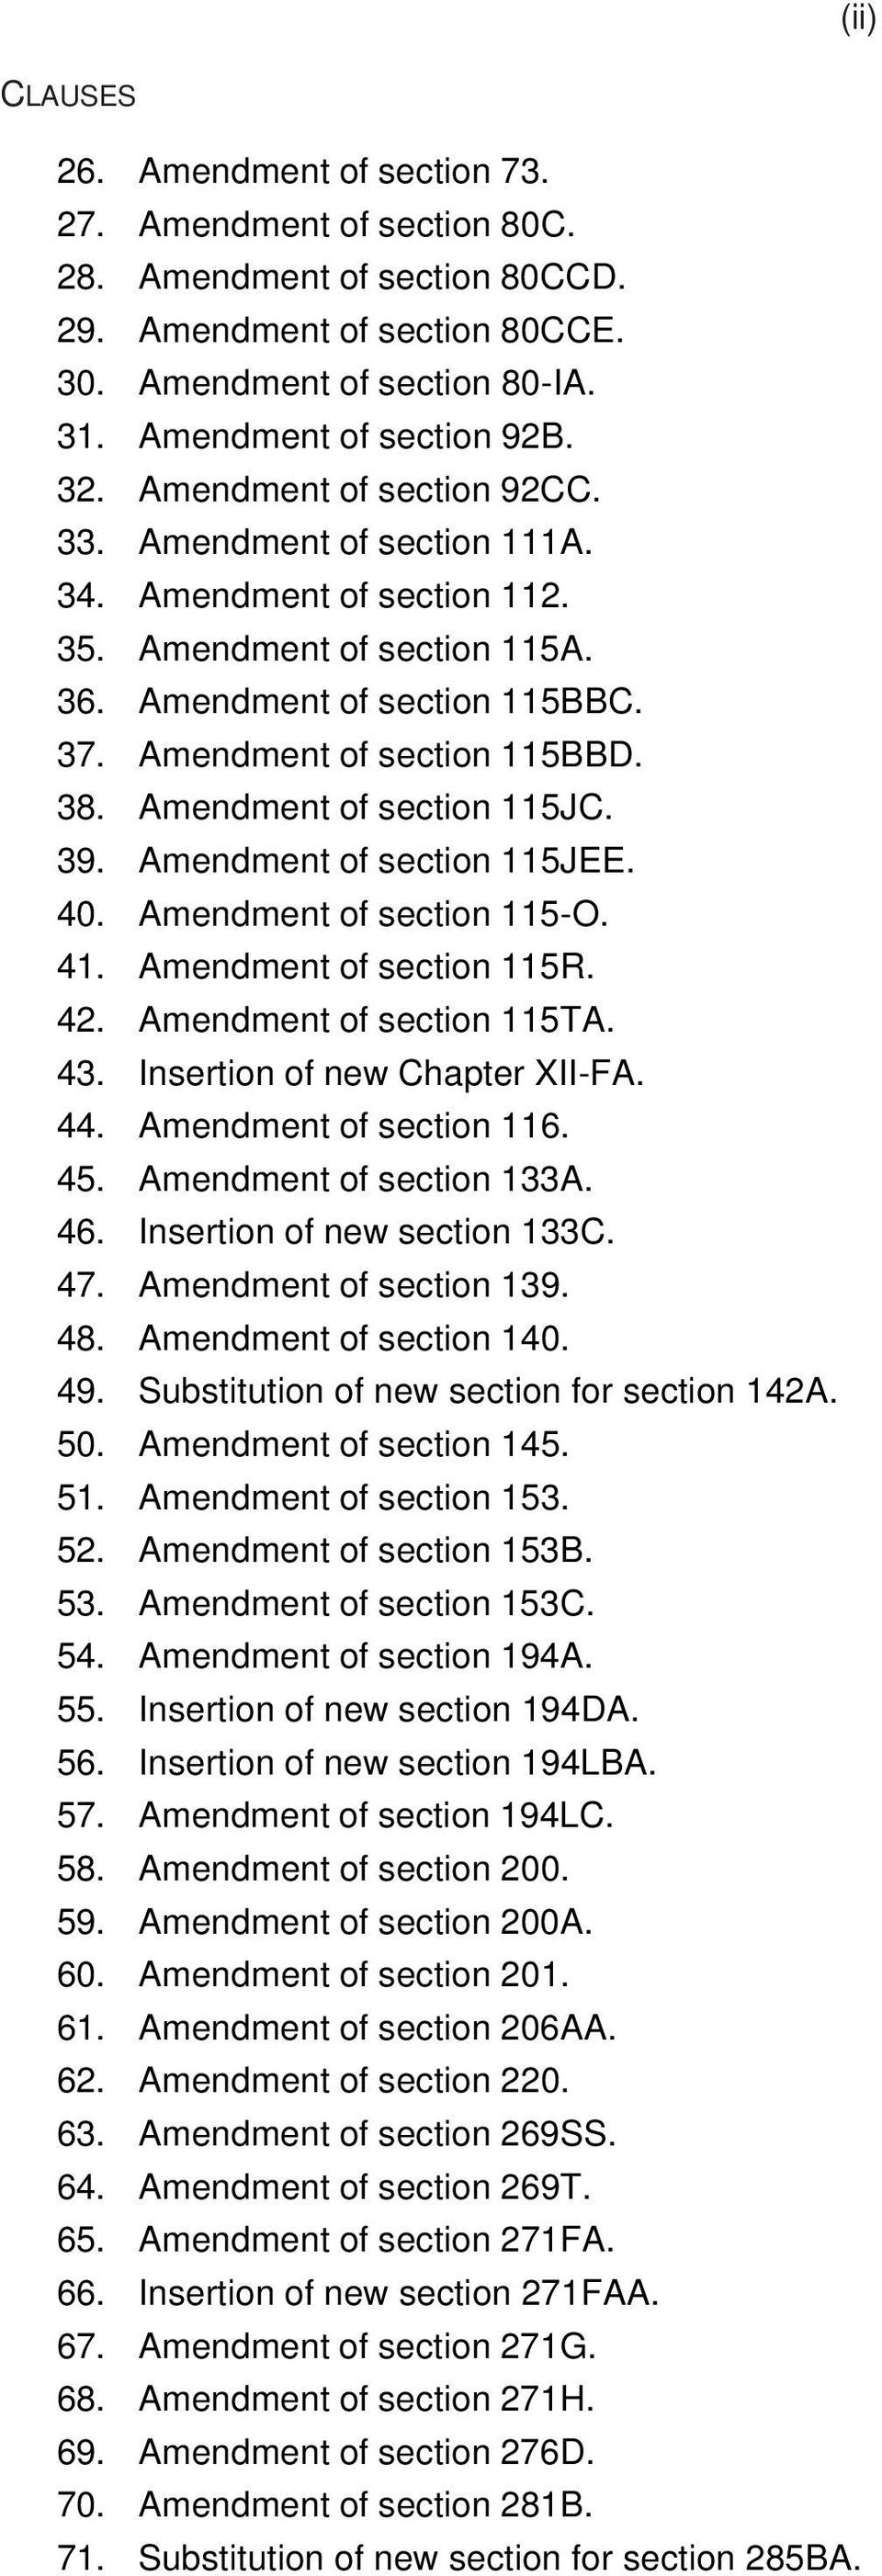 46. Insertion of new section 133C. 47. of section 139. 48. of section 1. 49. Substitution of new section for section 142A. 0. of section 14. 1. of section 3. 2. of section 3B. 3. of section 3C. 4. of section 194A.